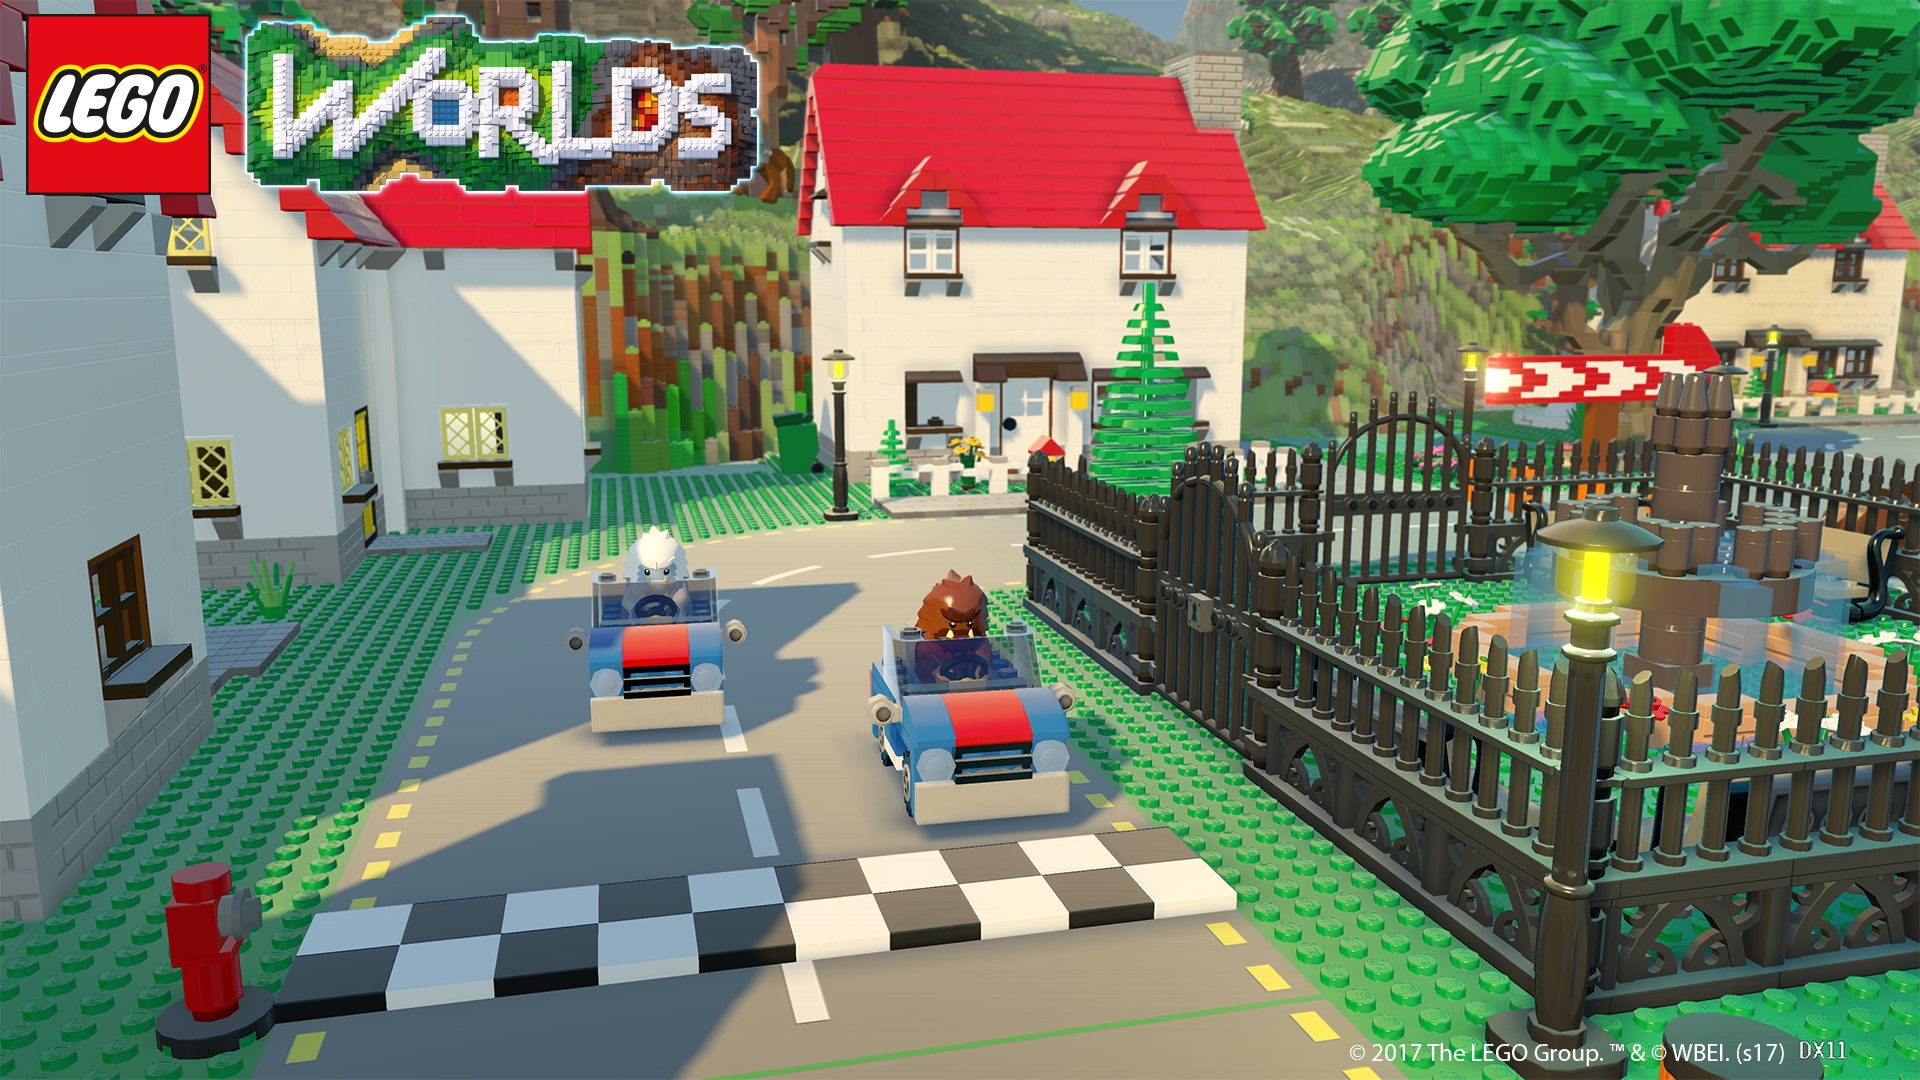 lego worlds download free pc full version oceans